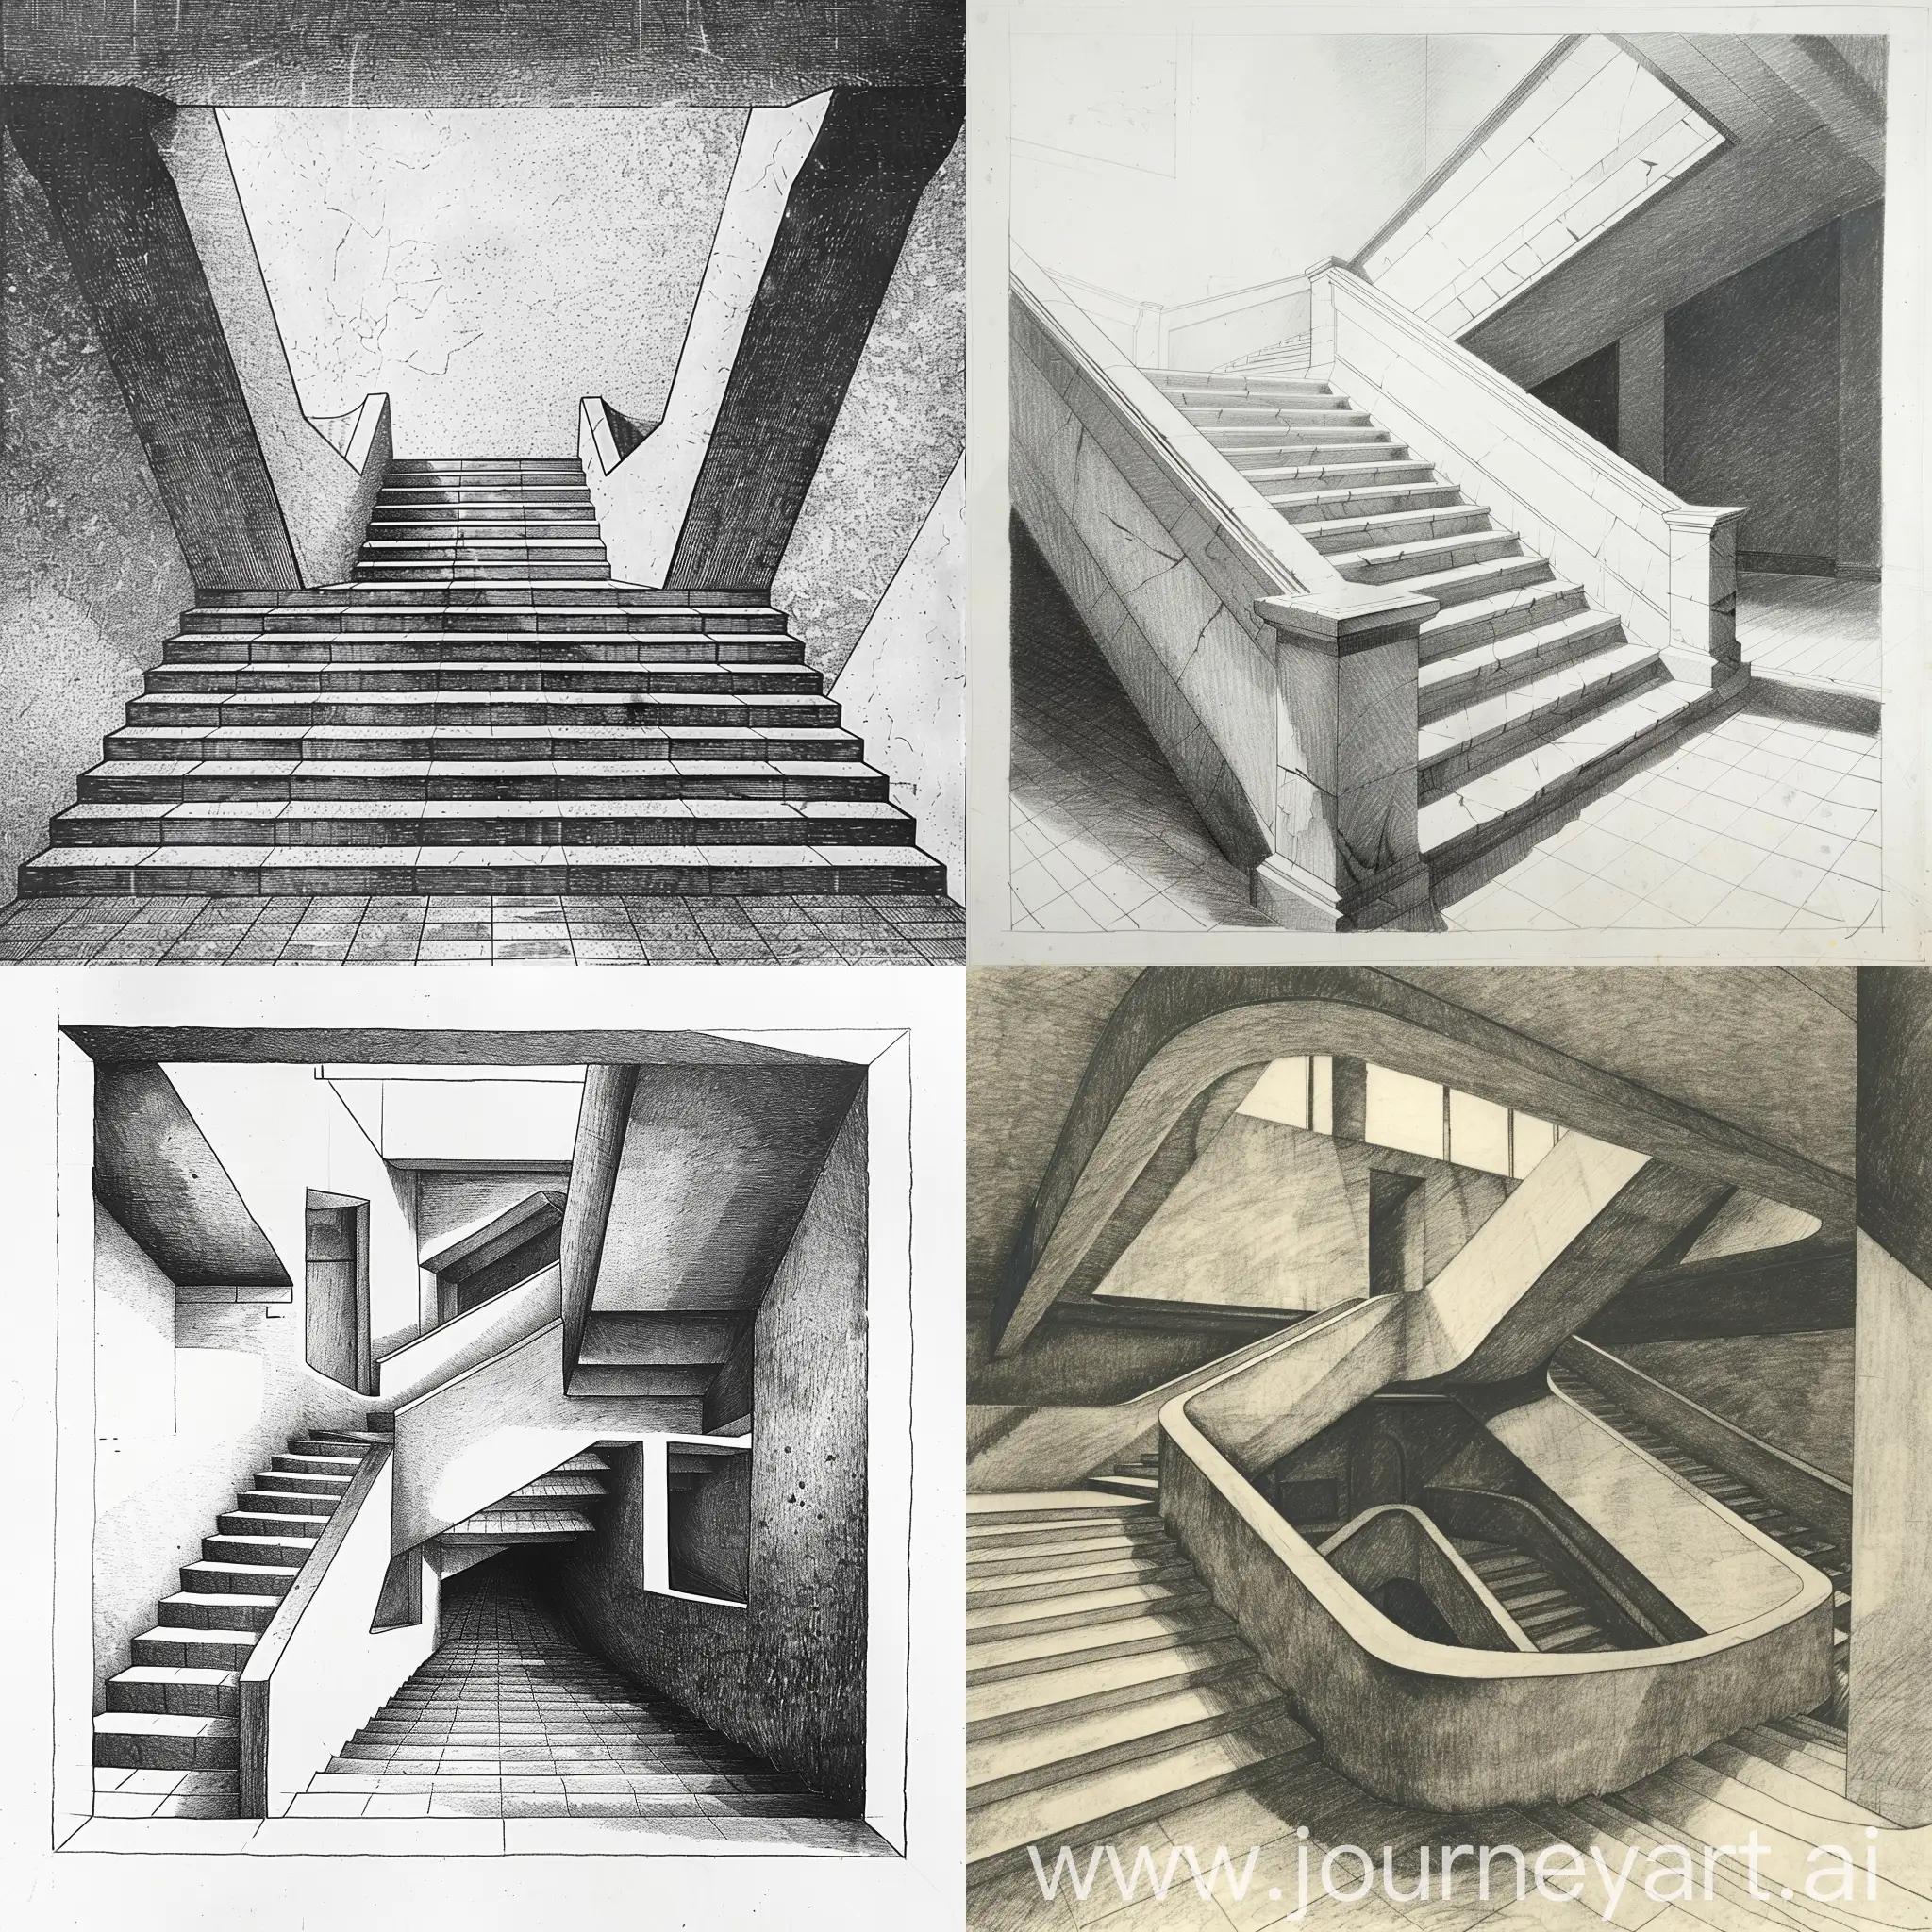 Grand-DoubleArmed-Staircase-in-TwoPoint-Perspective